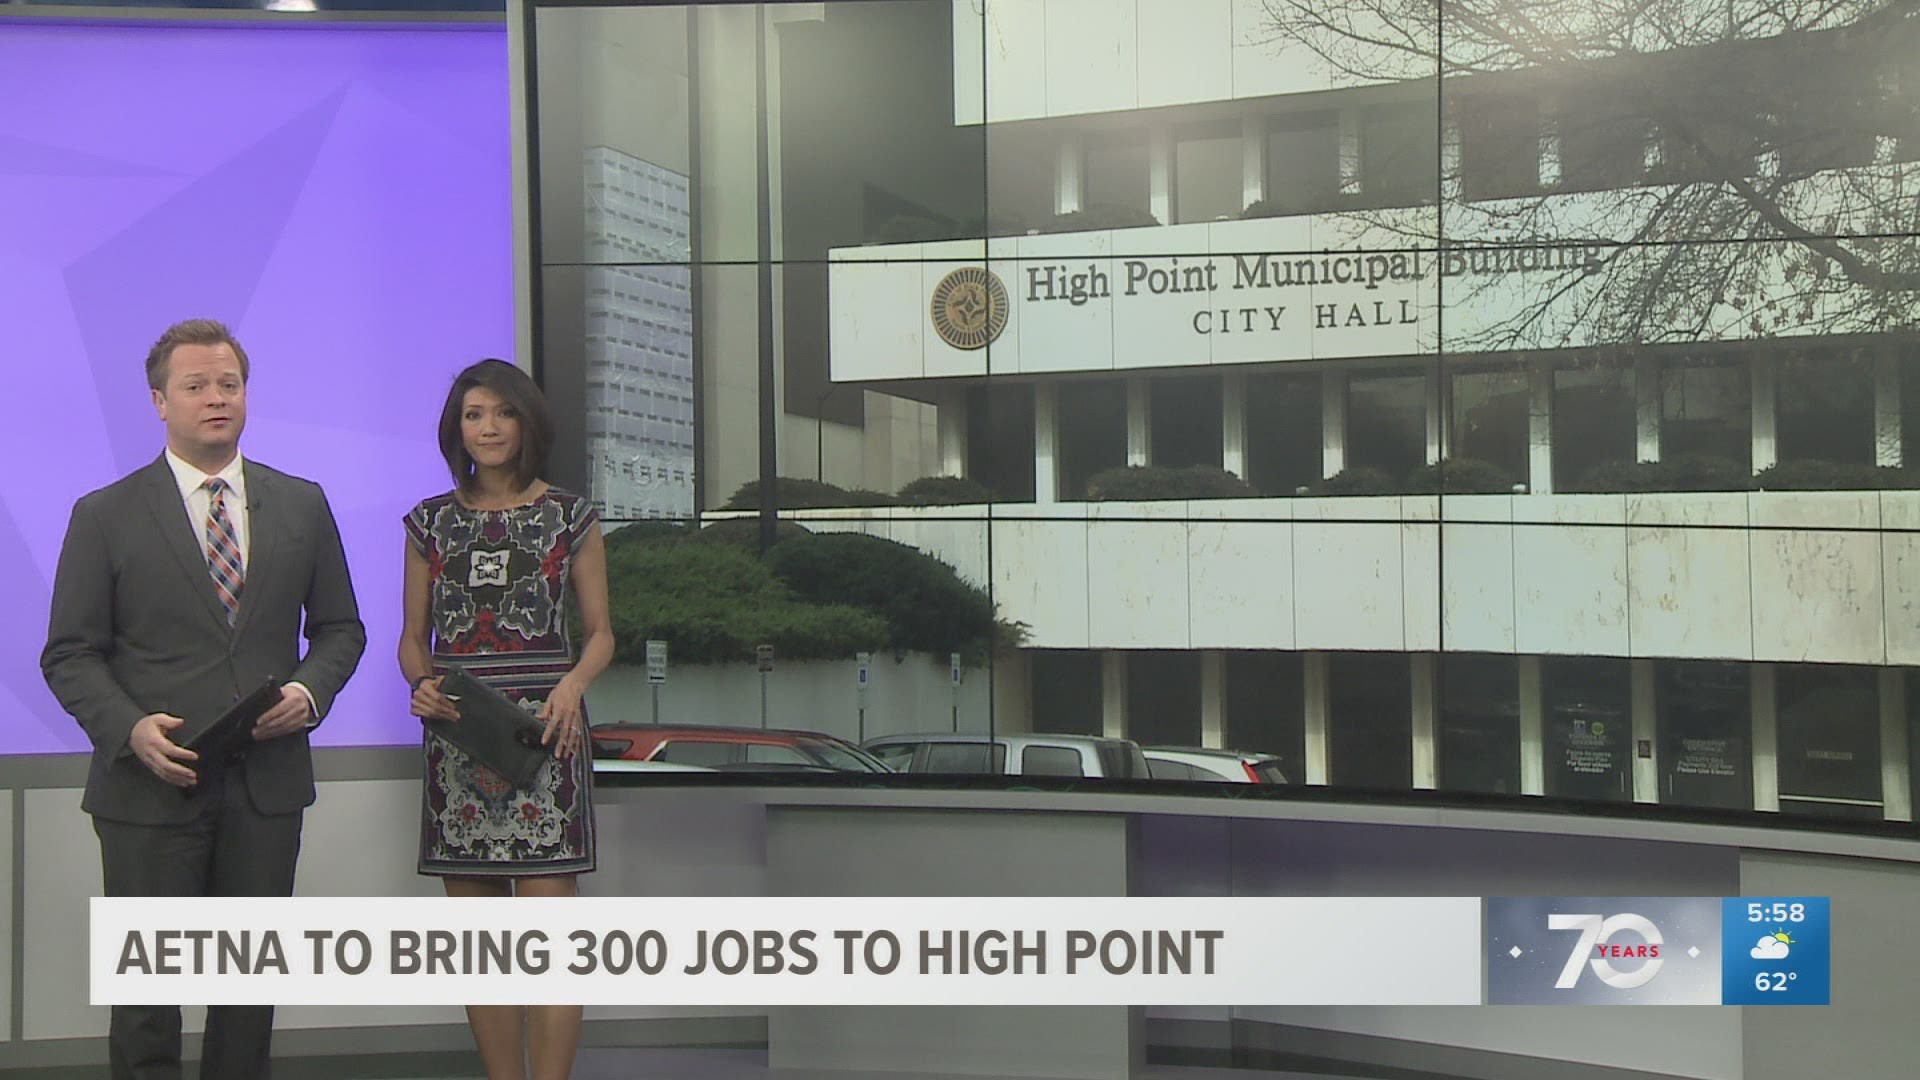 In a major announcement today, the company plans to bring 300 new jobs to High Point.